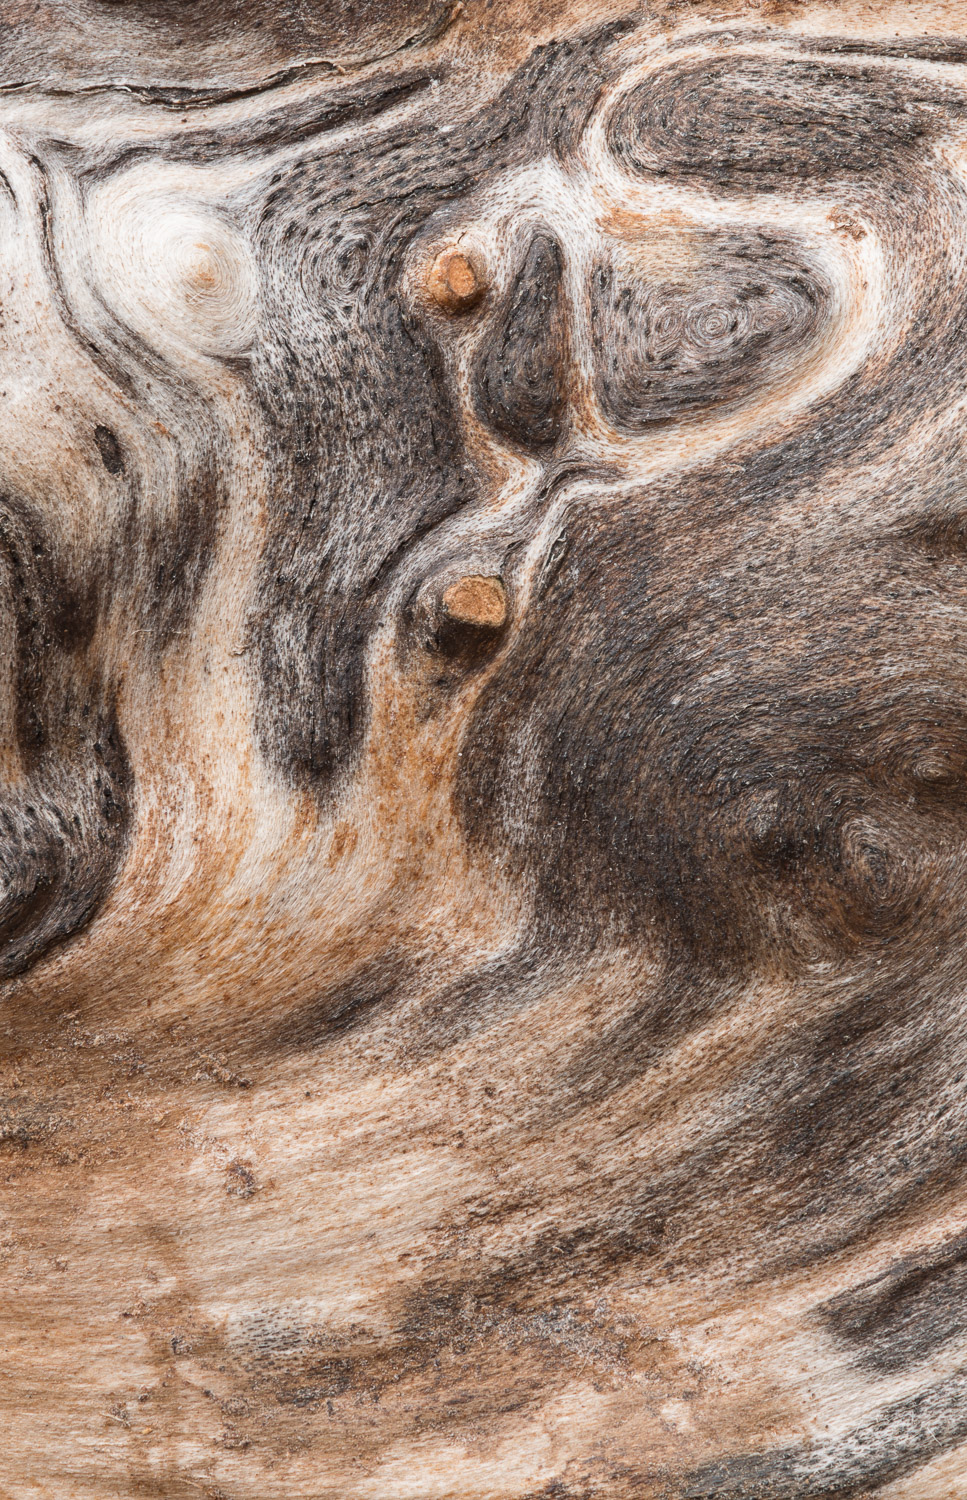 Close-up of the wood grain patterns in a weathered felled apple tree log. Image #2952